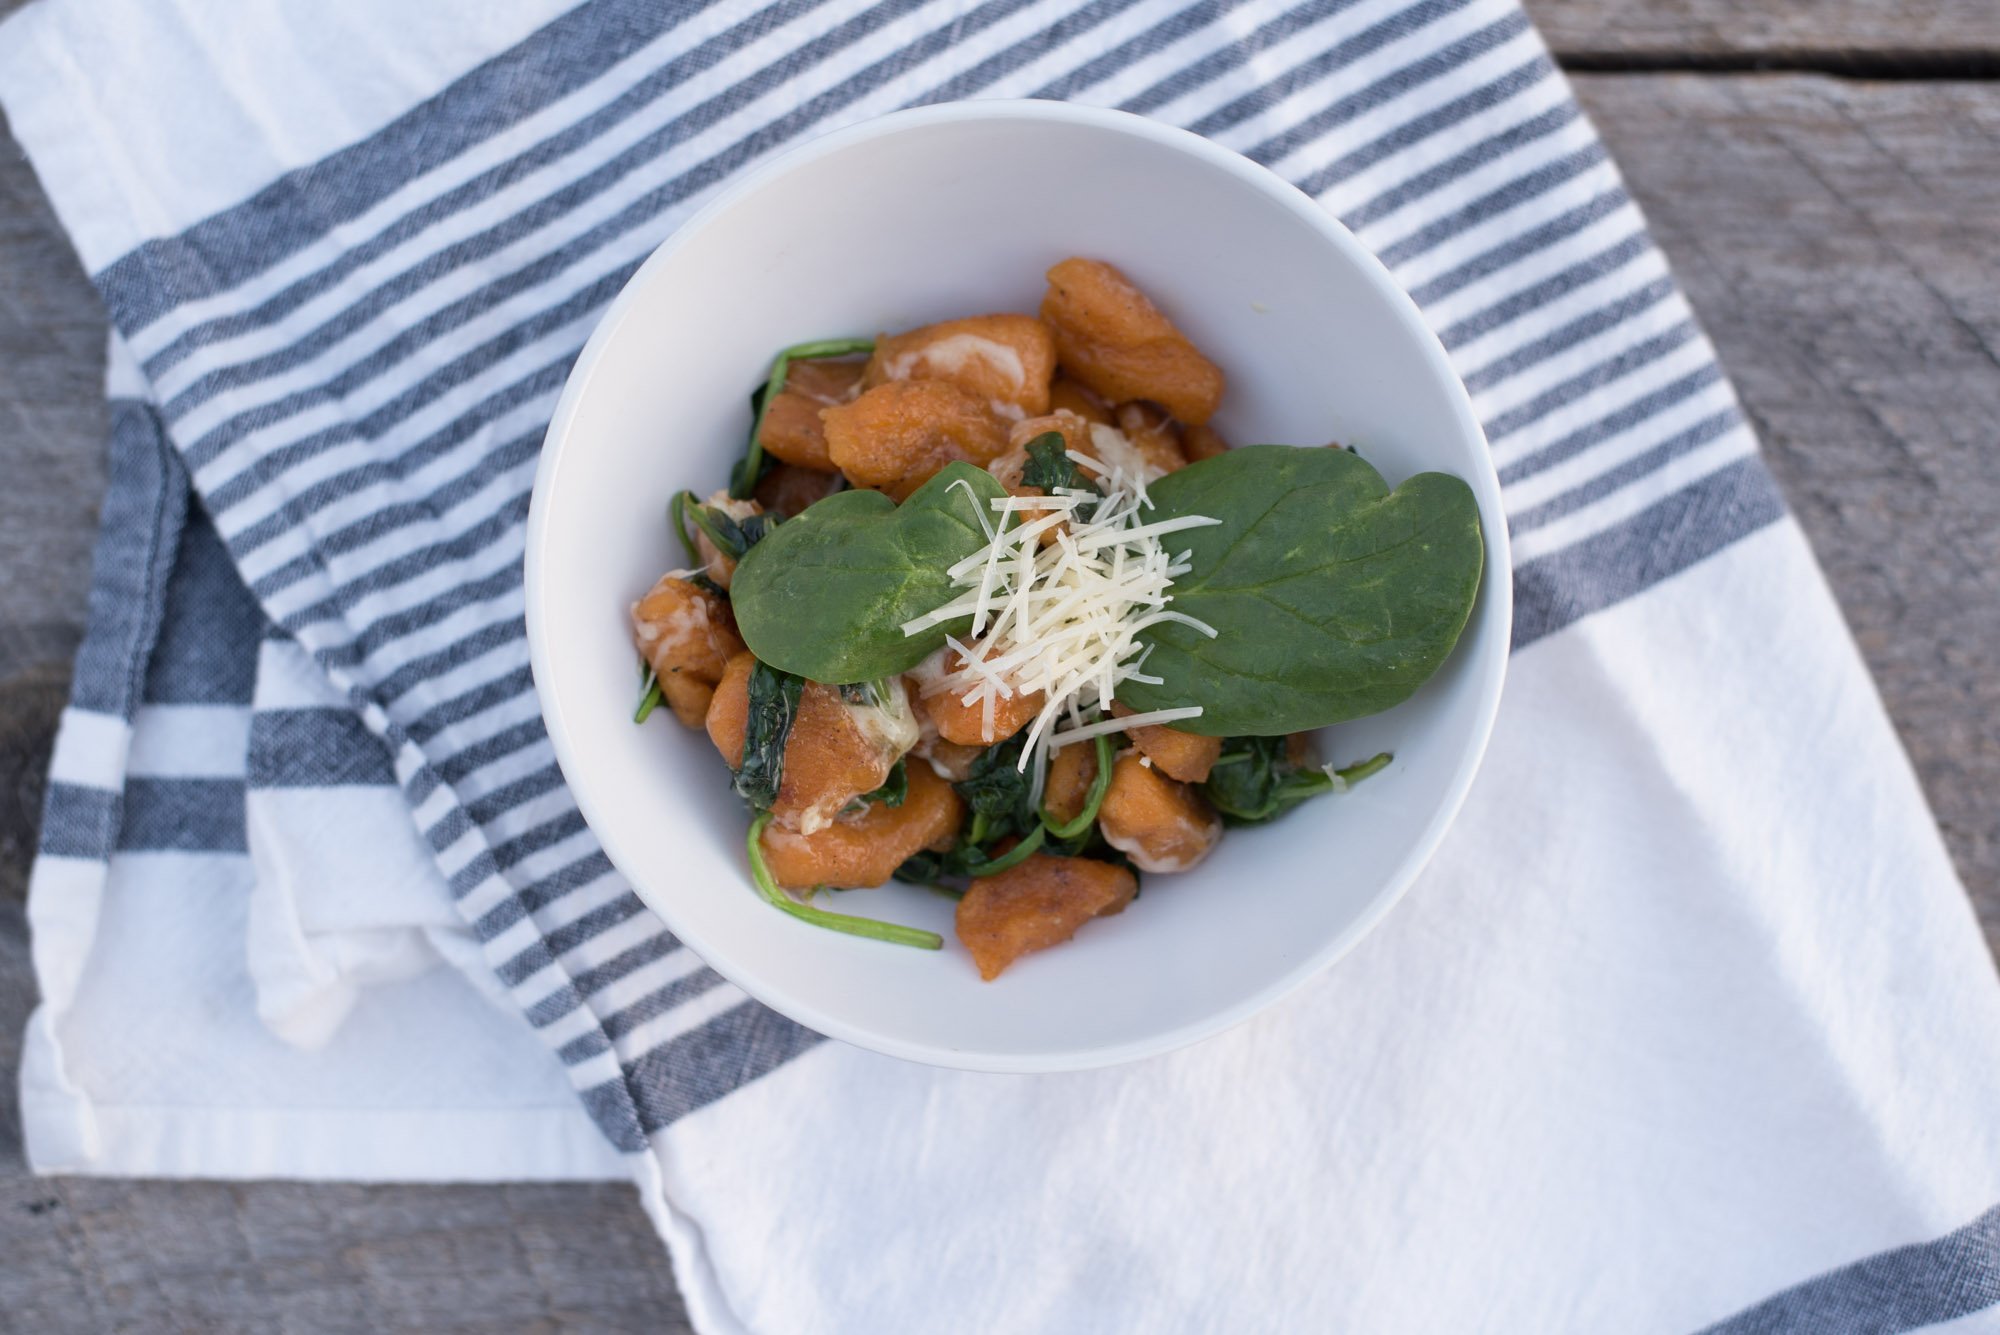 Delicious Paleo homemade Sweet Potato Gnocchi with a garlic butter spinach sauce